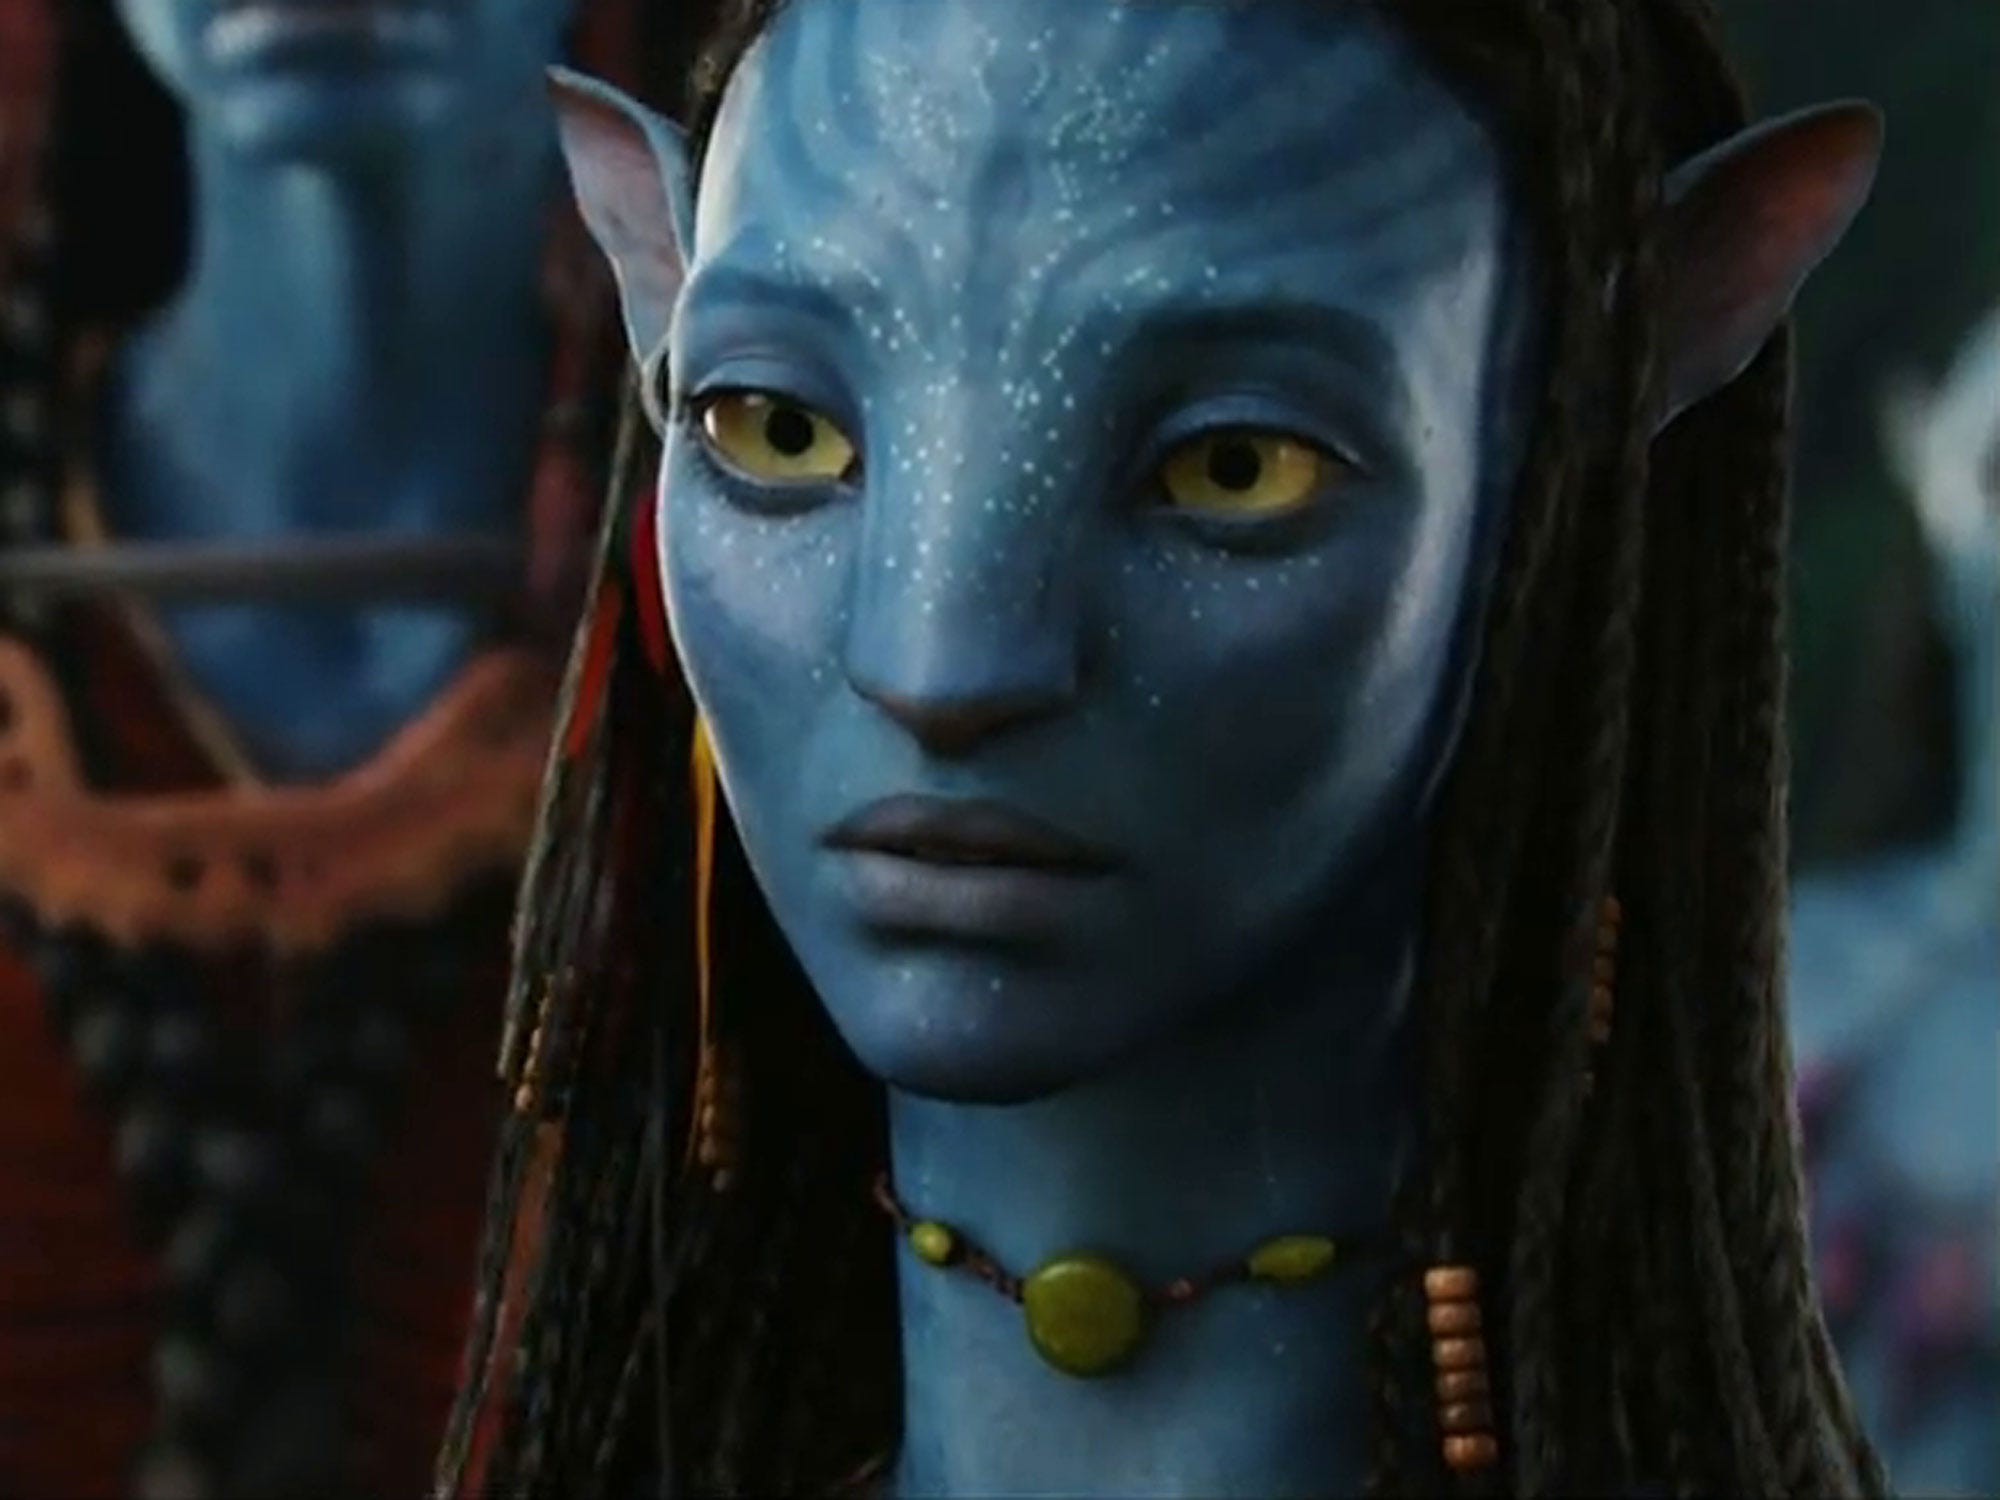 <p>James Cameron's "Avatar" follows an ex-Marine as he's sent to an alien planet to study their world by immersing himself in their culture. The movie features Zoe Saldana, Sam Worthington, Sigourney Weaver, and Michelle Rodriguez.</p><p>"Avatar" has a critical score of 81% and audience score <a href="https://www.rottentomatoes.com/m/avatar">of 82% on Rotten Tomatoes</a>.</p><p>"'Avatar' is a joyous celebration of story craft and the visual possibilities of cinema," <a href="https://www.rottentomatoes.com/m/avatar">IndieWire's Anne Thompson</a> wrote in 2010. "Cameron had set his sights on taking the technology of film where no one had gone before. And he delivers. 'Avatar' is stunning."</p>